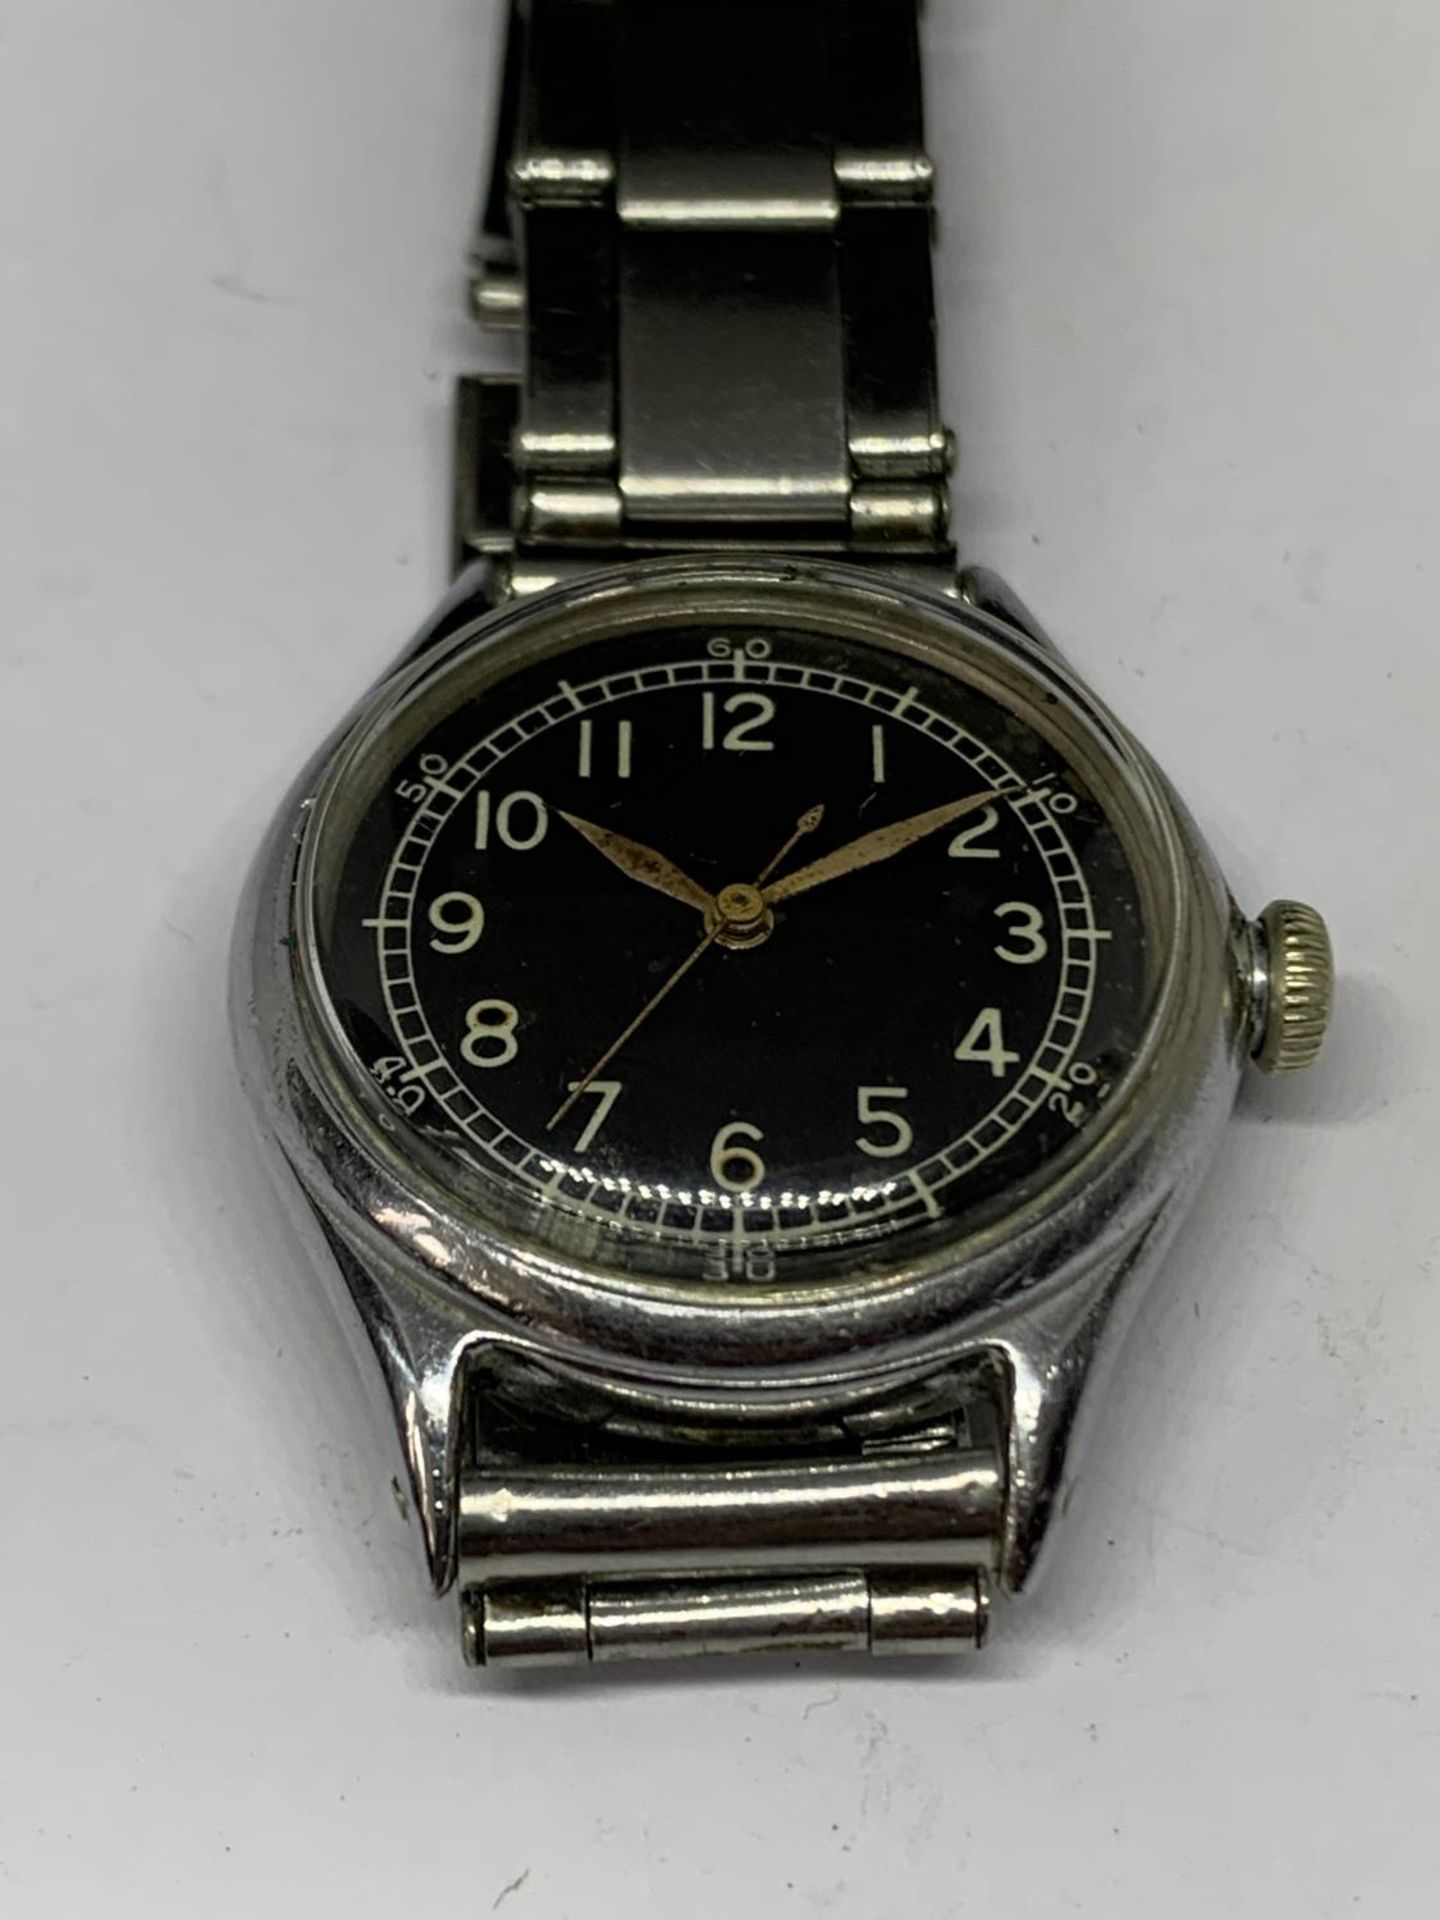 A WW2 BULOVA MILITARY ISSUE WATCH 1940'S - Image 2 of 4